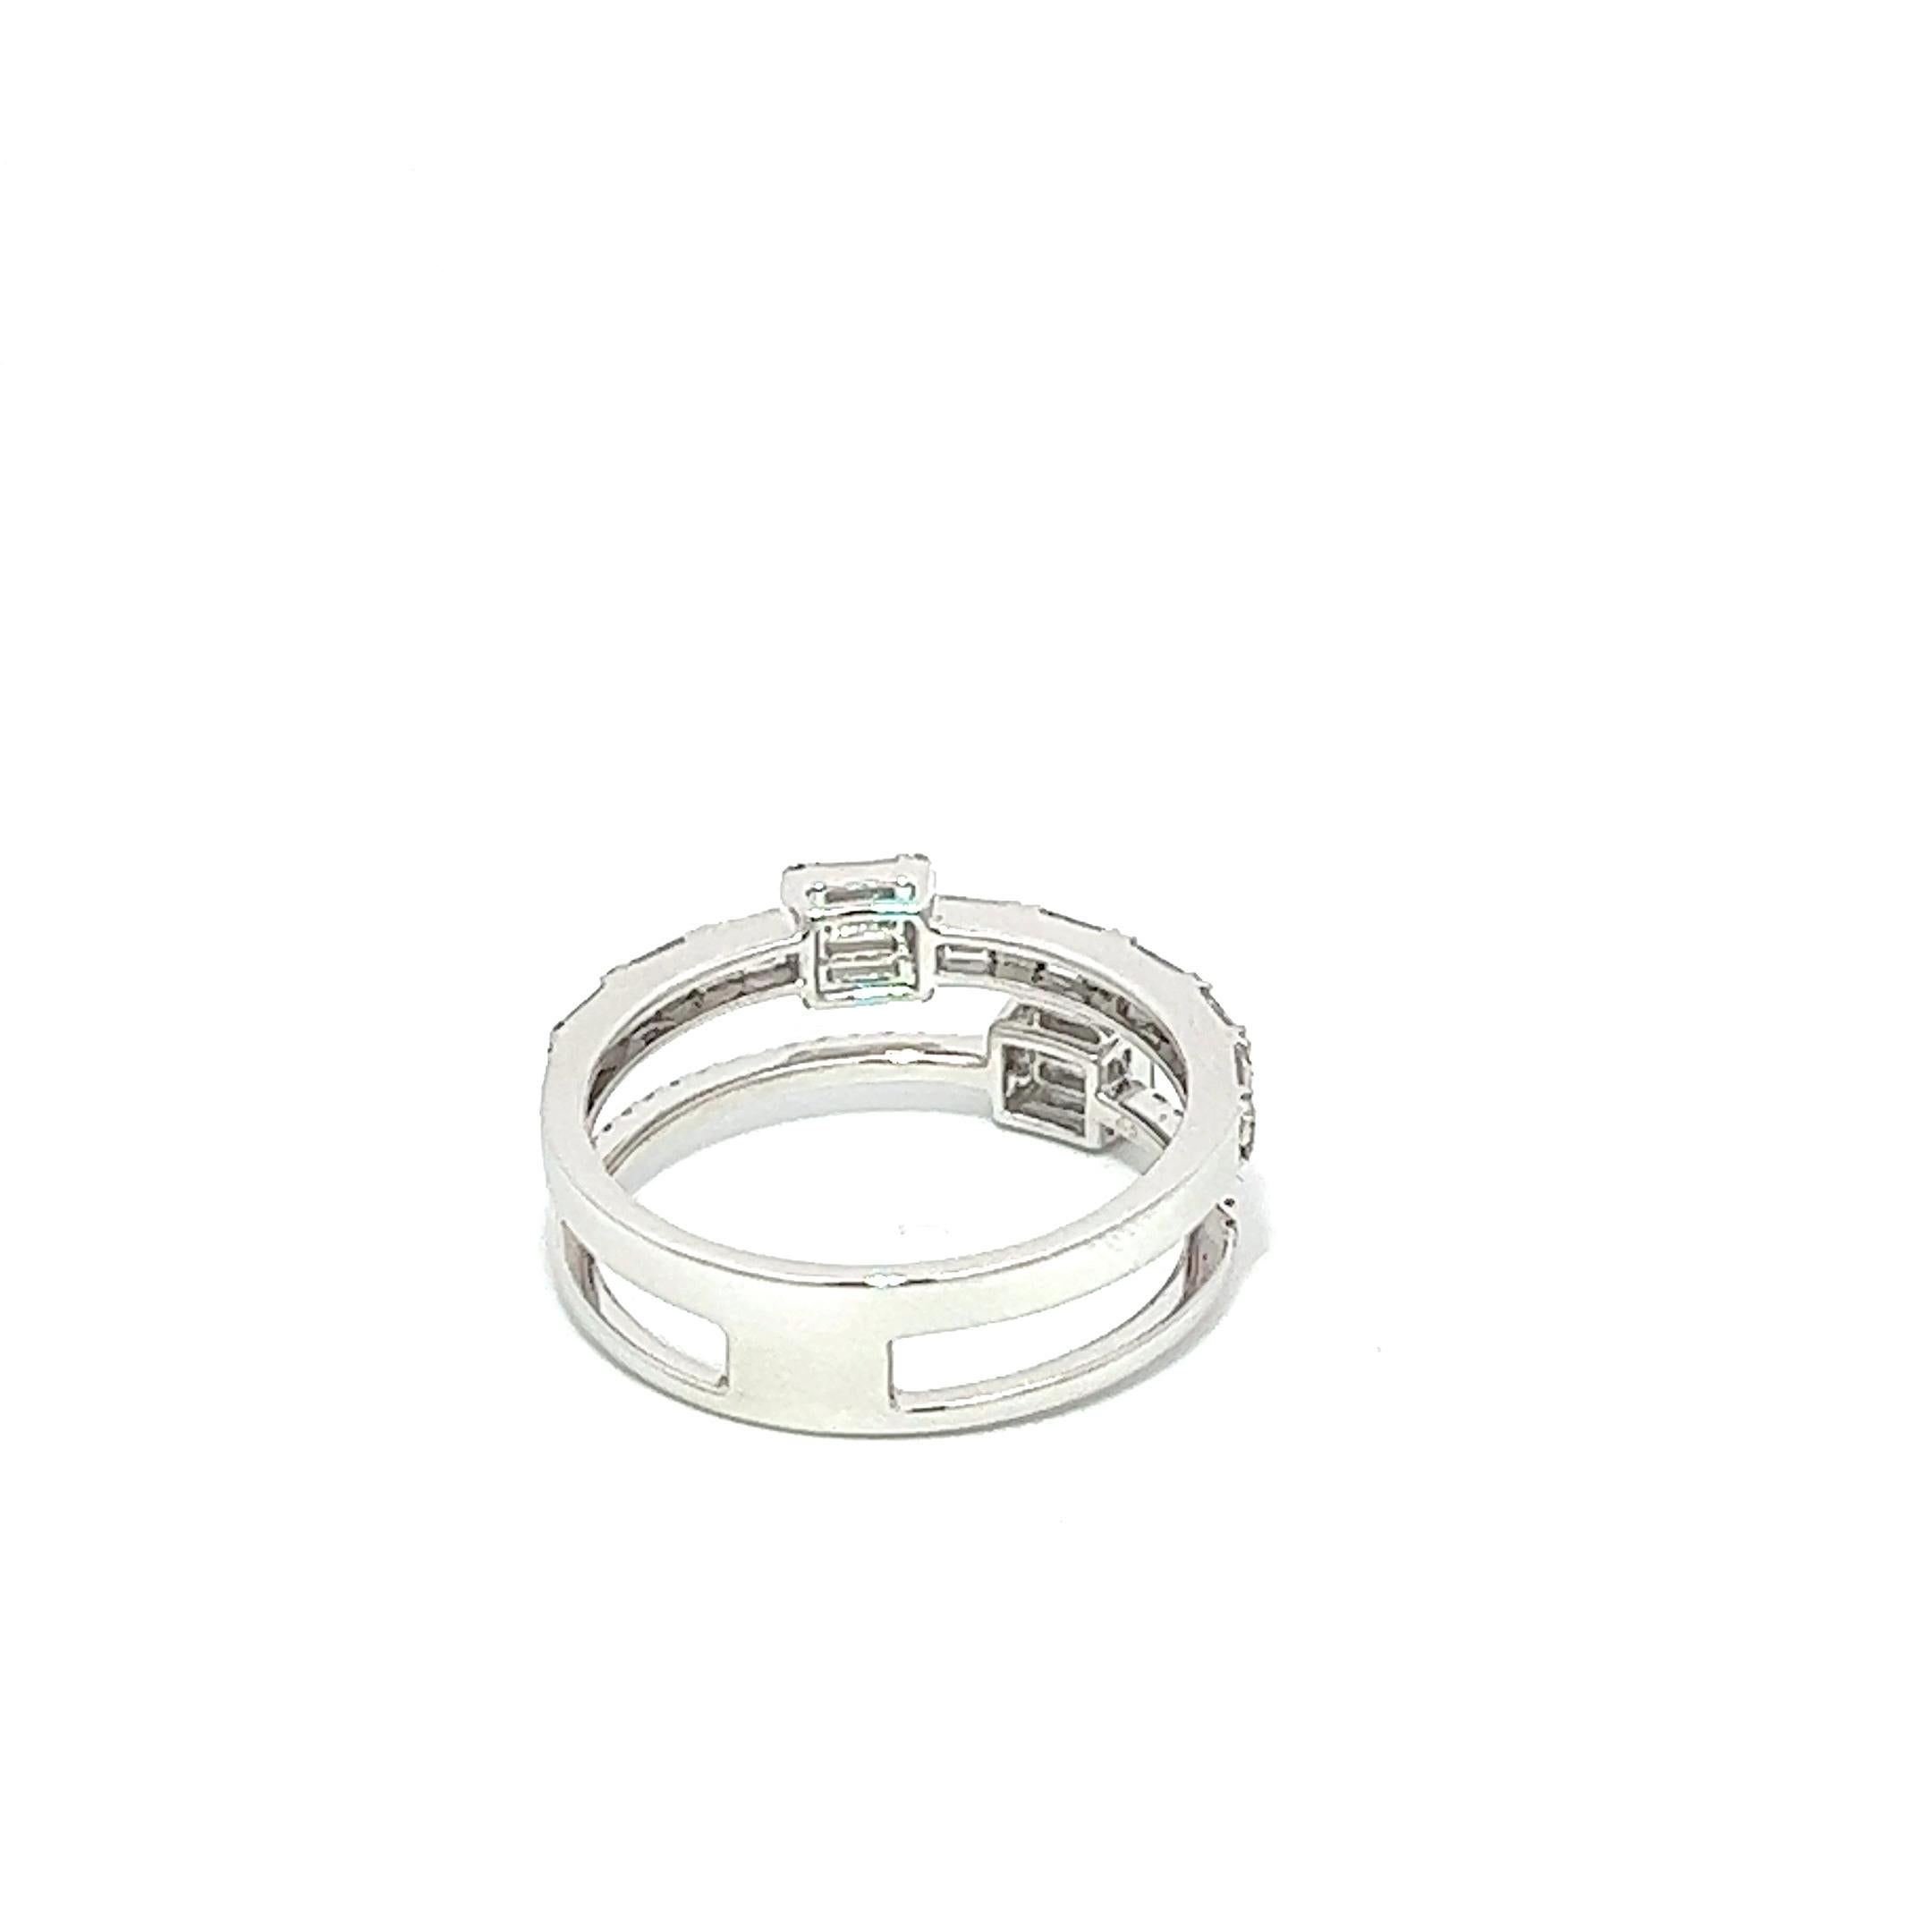 Baguette & Round Diamonds 18KW Gold Setiing Ladie's Ring perfect for a special occasion, to show your love one how much you love them.

18KW  3.31Grams
28BD  0.43CT
48RD  0.20CT